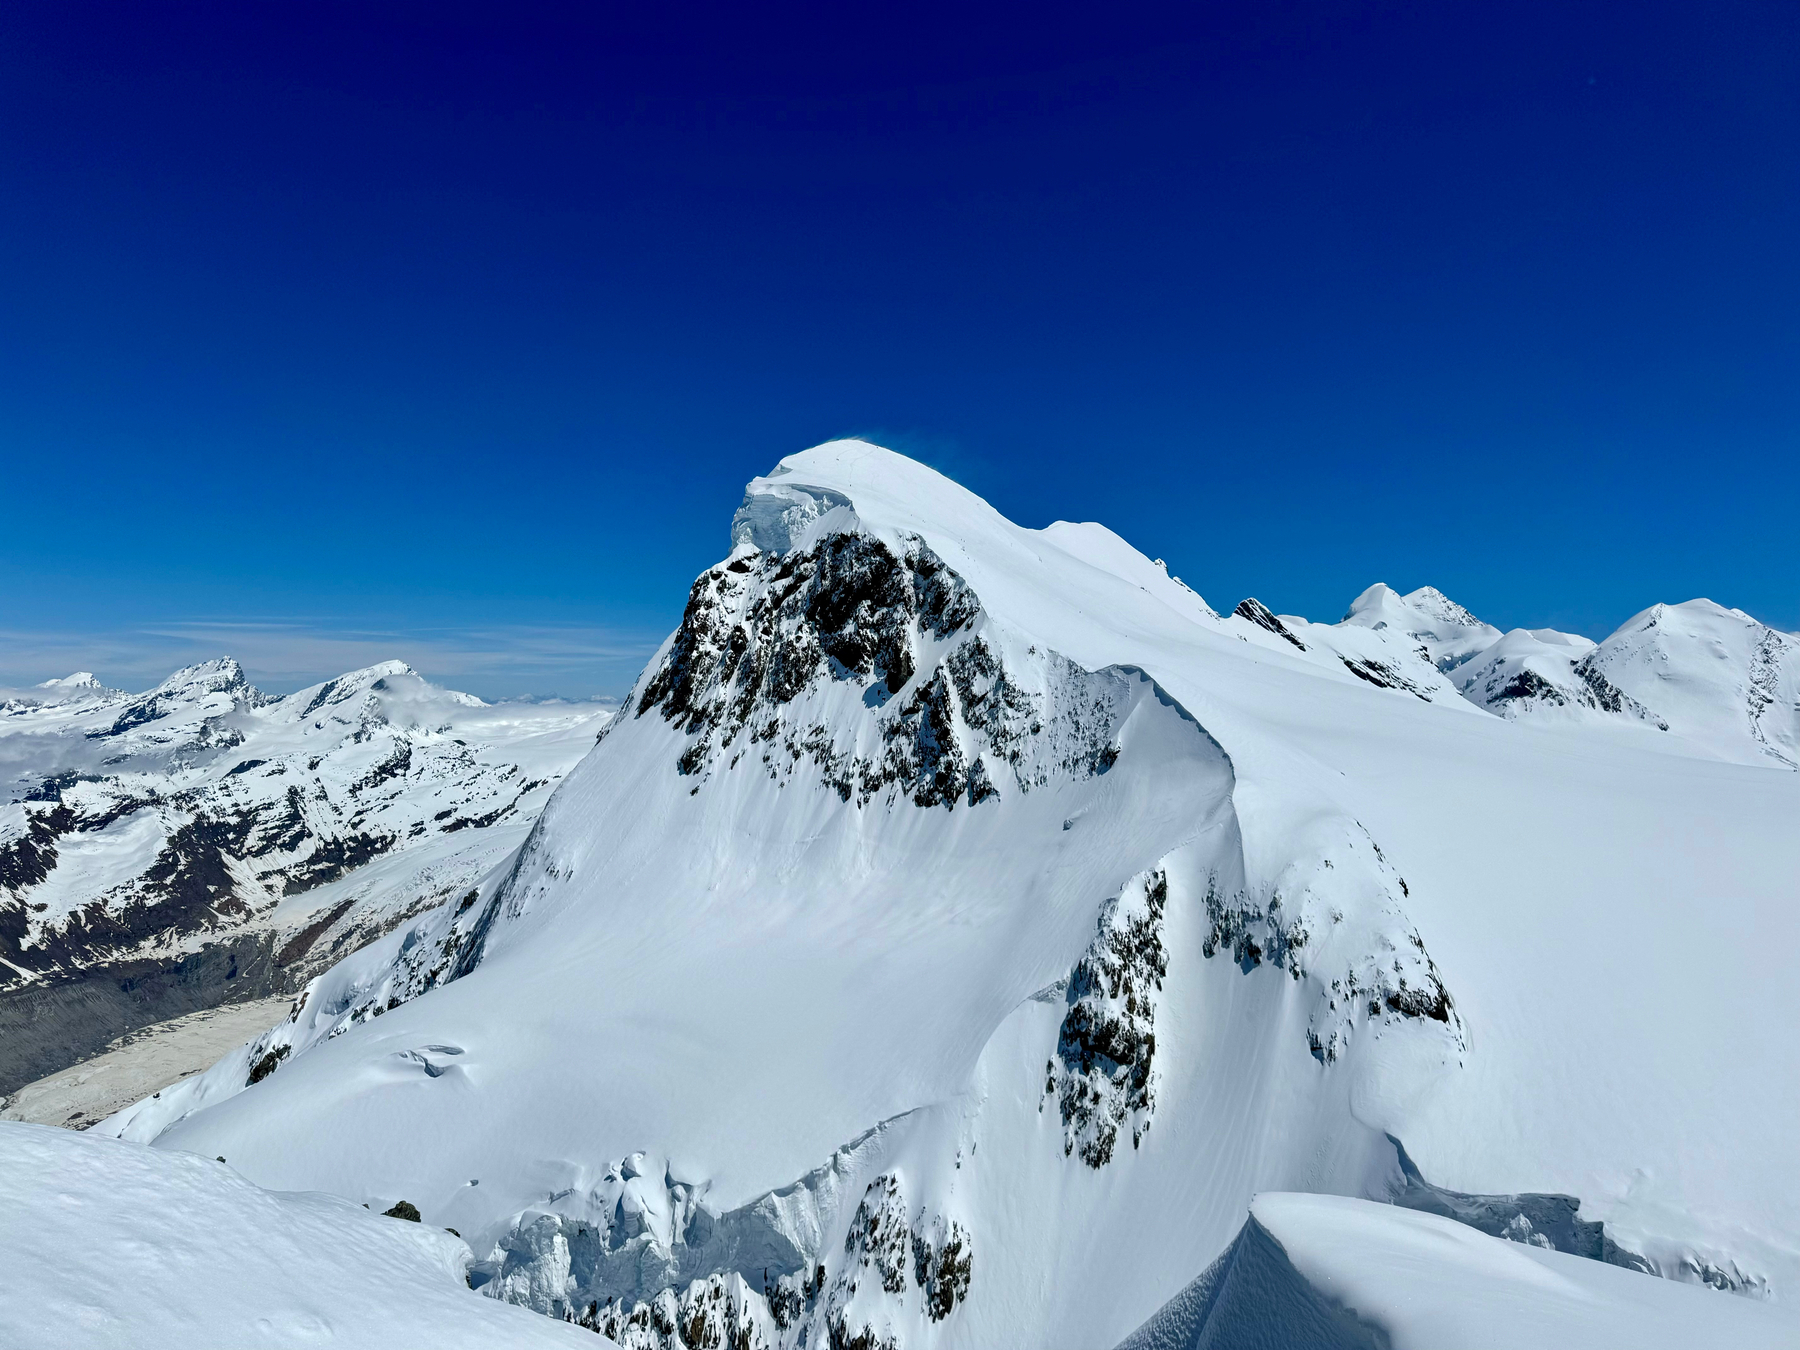 A snow-covered mountain peak under a clear blue sky with surrounding alpine scenery.